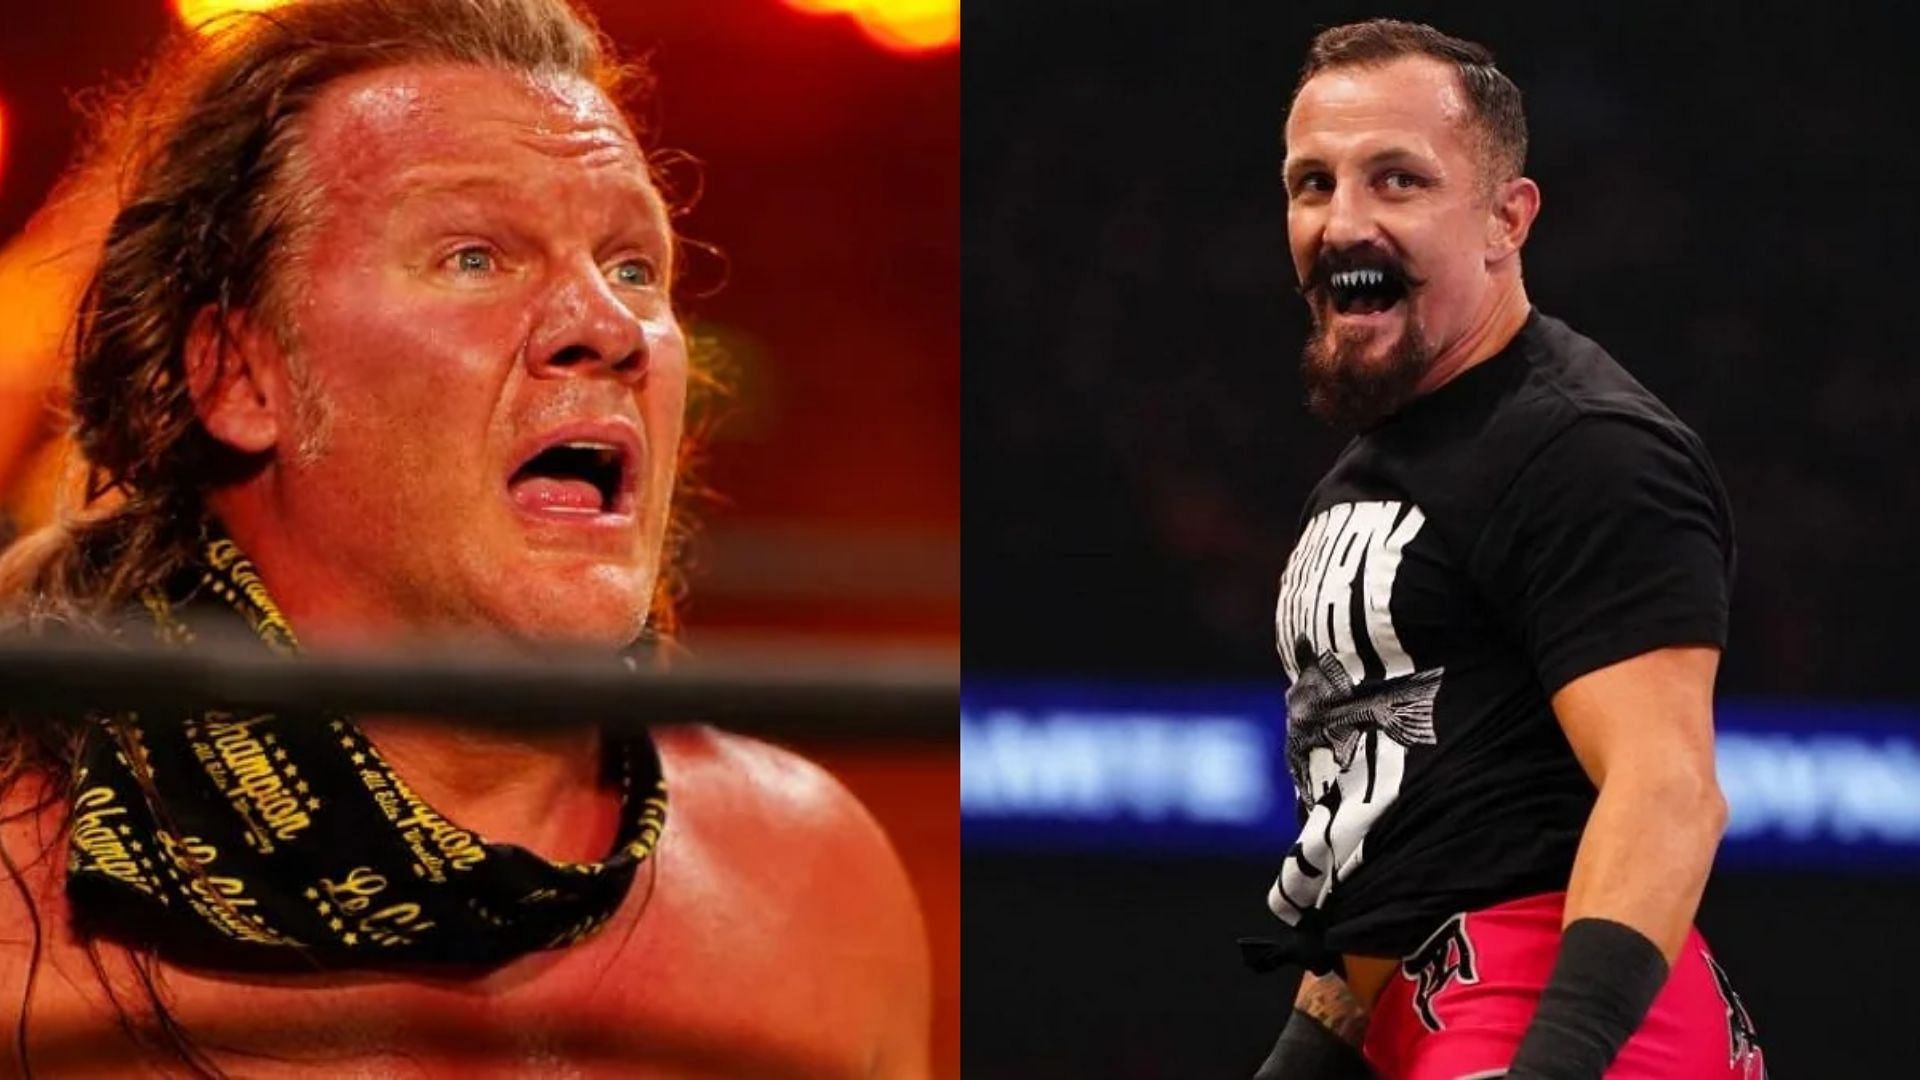 Could Chris Jericho still be on the receiving end of a Bobby Fish attack?